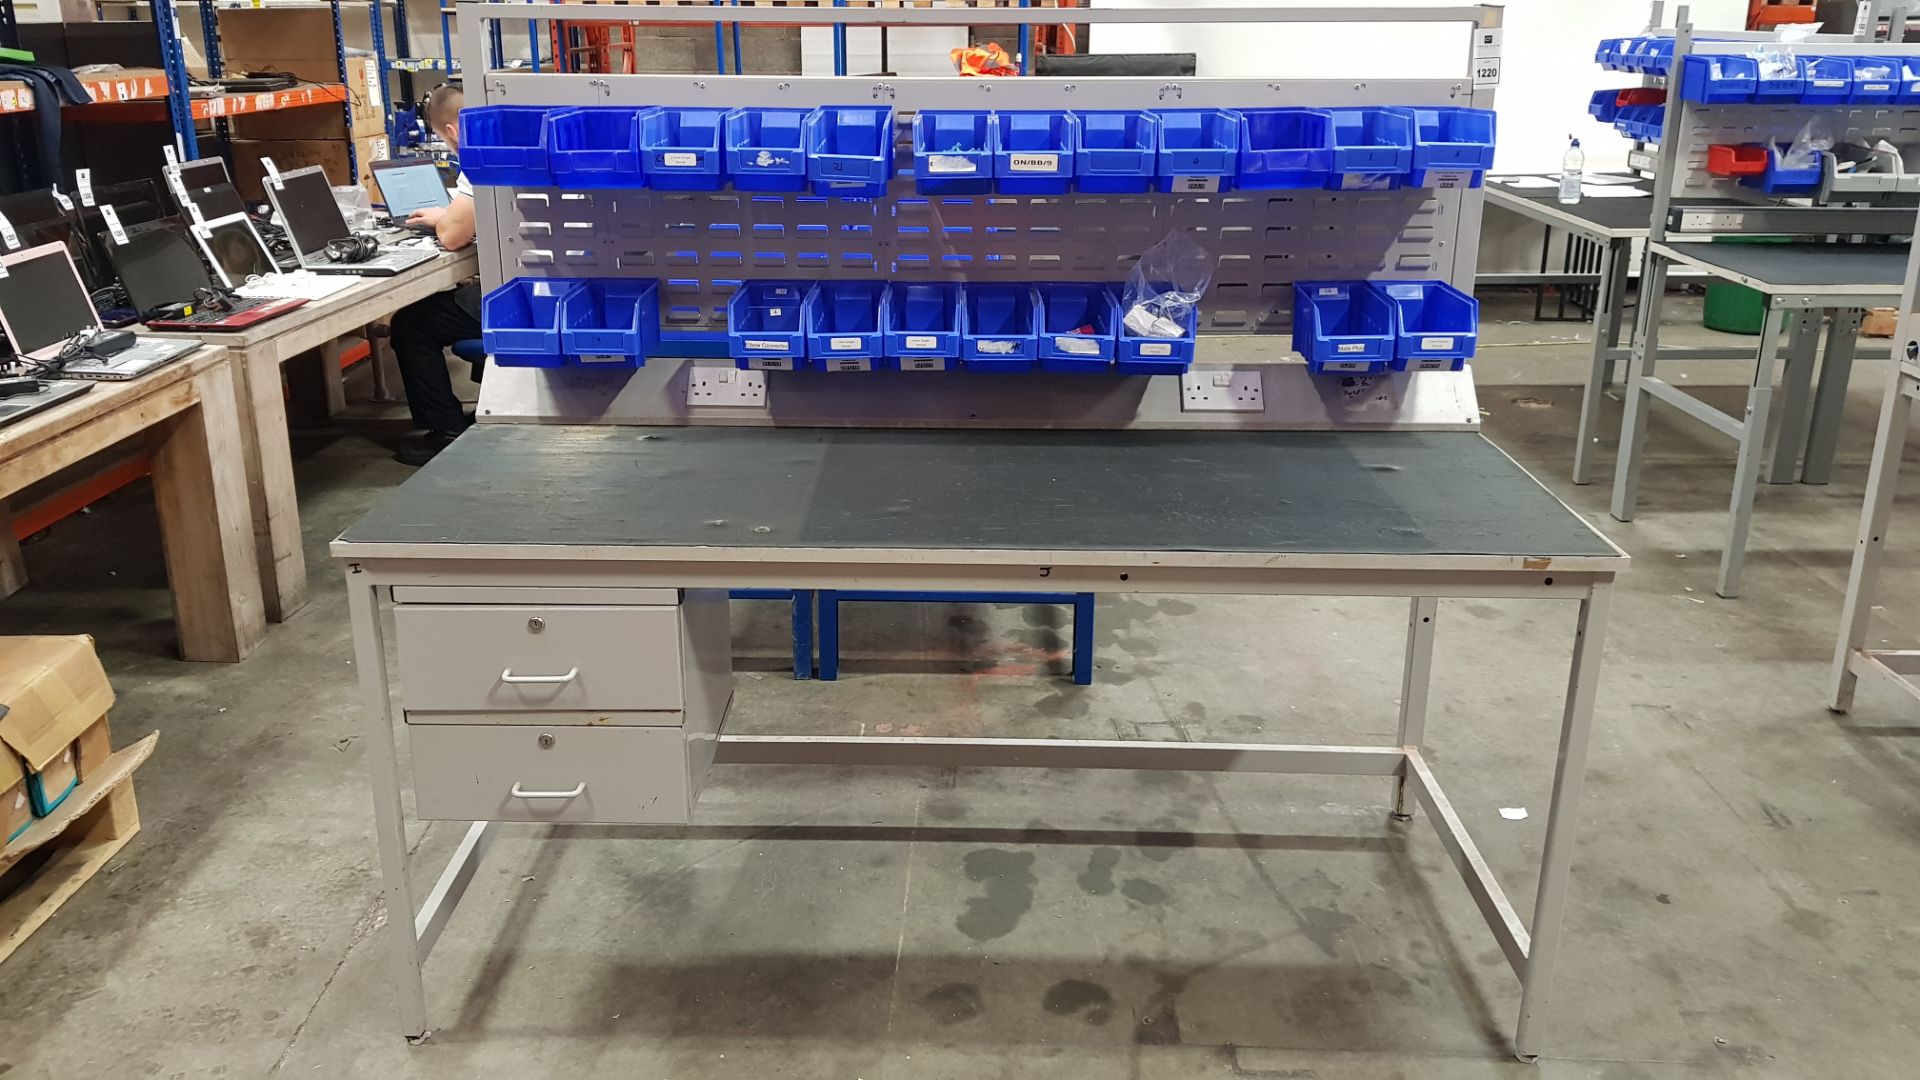 1 X INDUSTRIAL WORK BENCH WITH 2 DOUBLE SOCKETS, 2 BUILT-IN DRAWS AND HANGING TRAYS. OVERALL